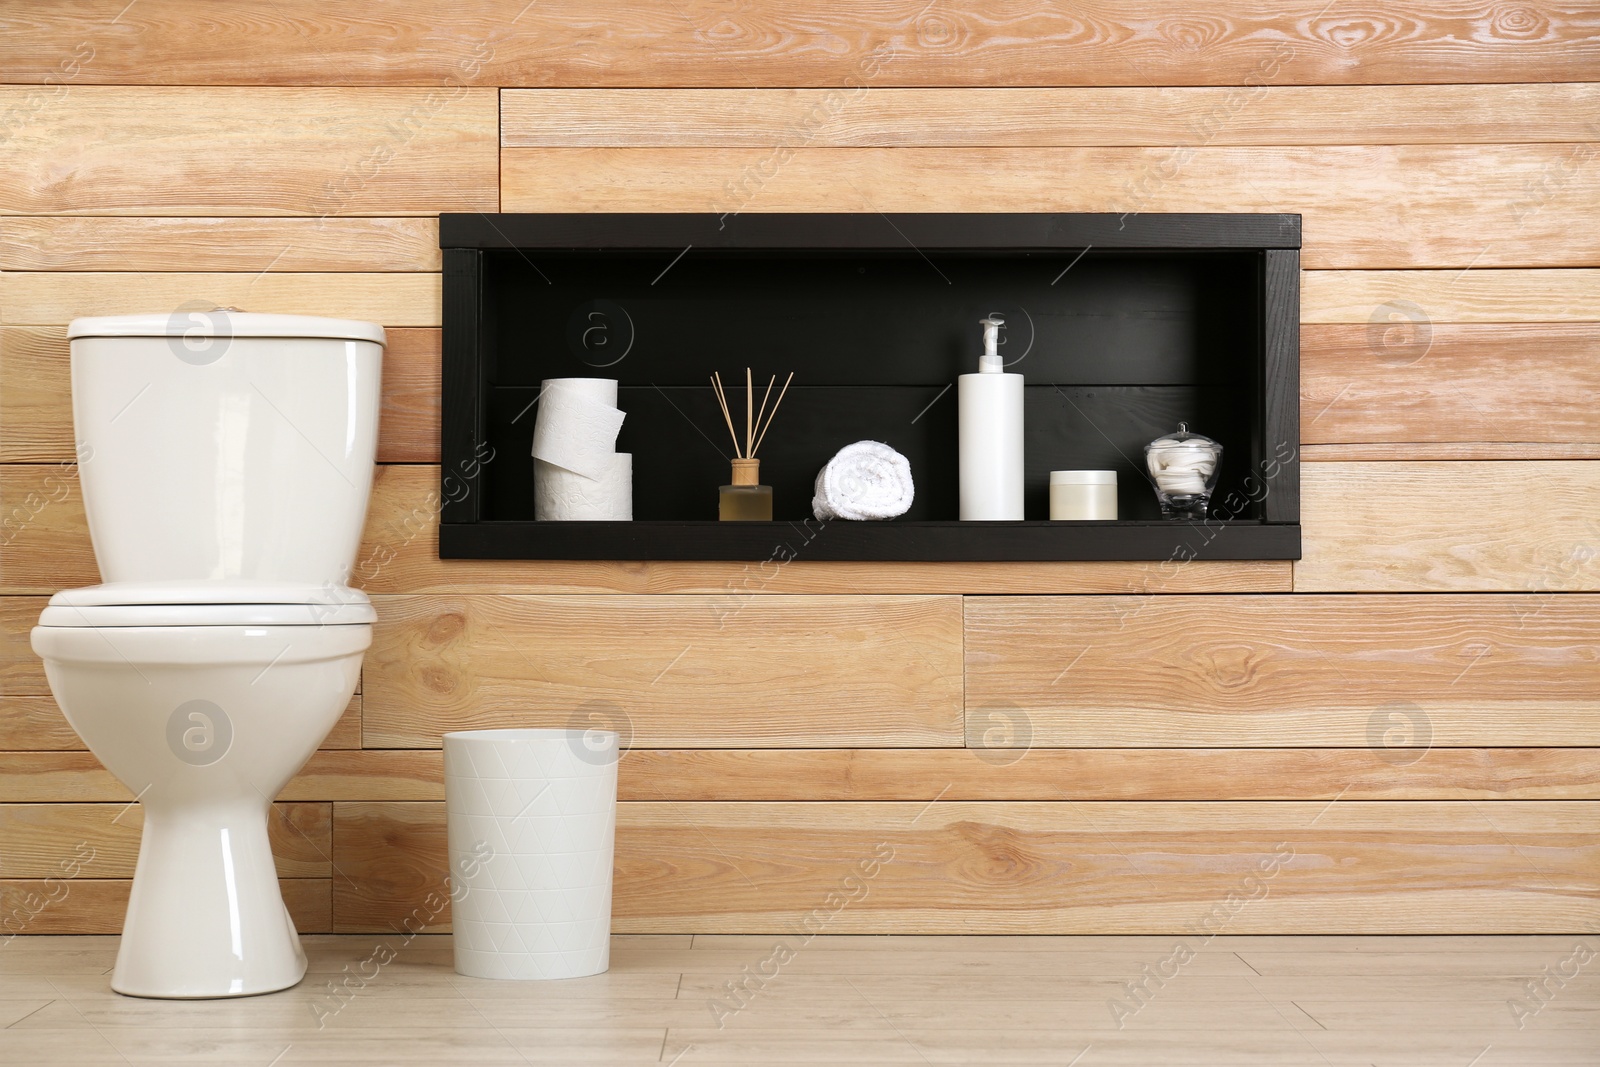 Photo of Toilet bowl at wooden wall with bathroom accessories in niche